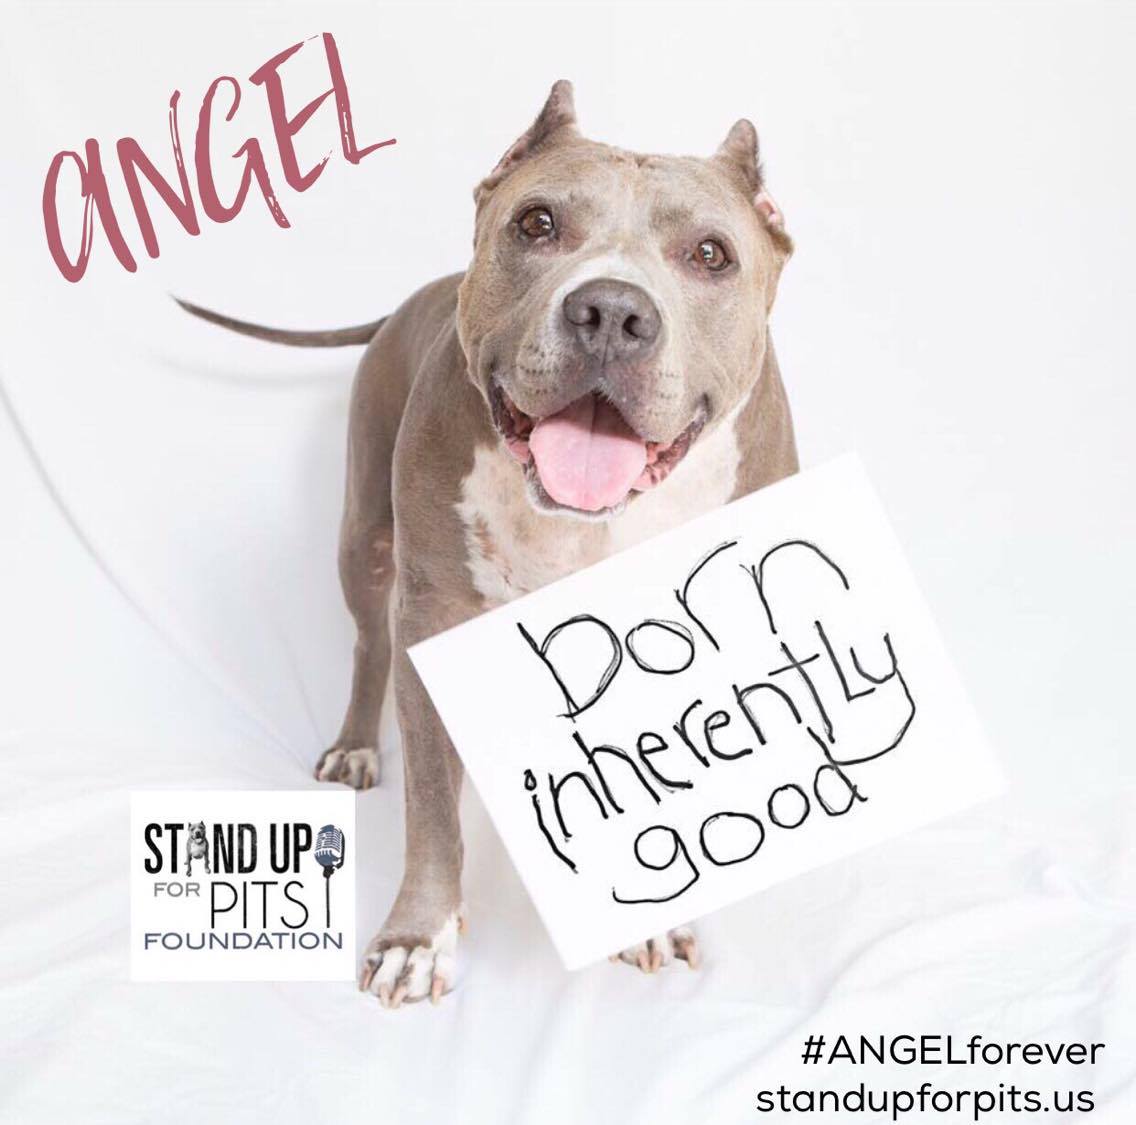 Angel Stand Up For Pits Born Inherently Good